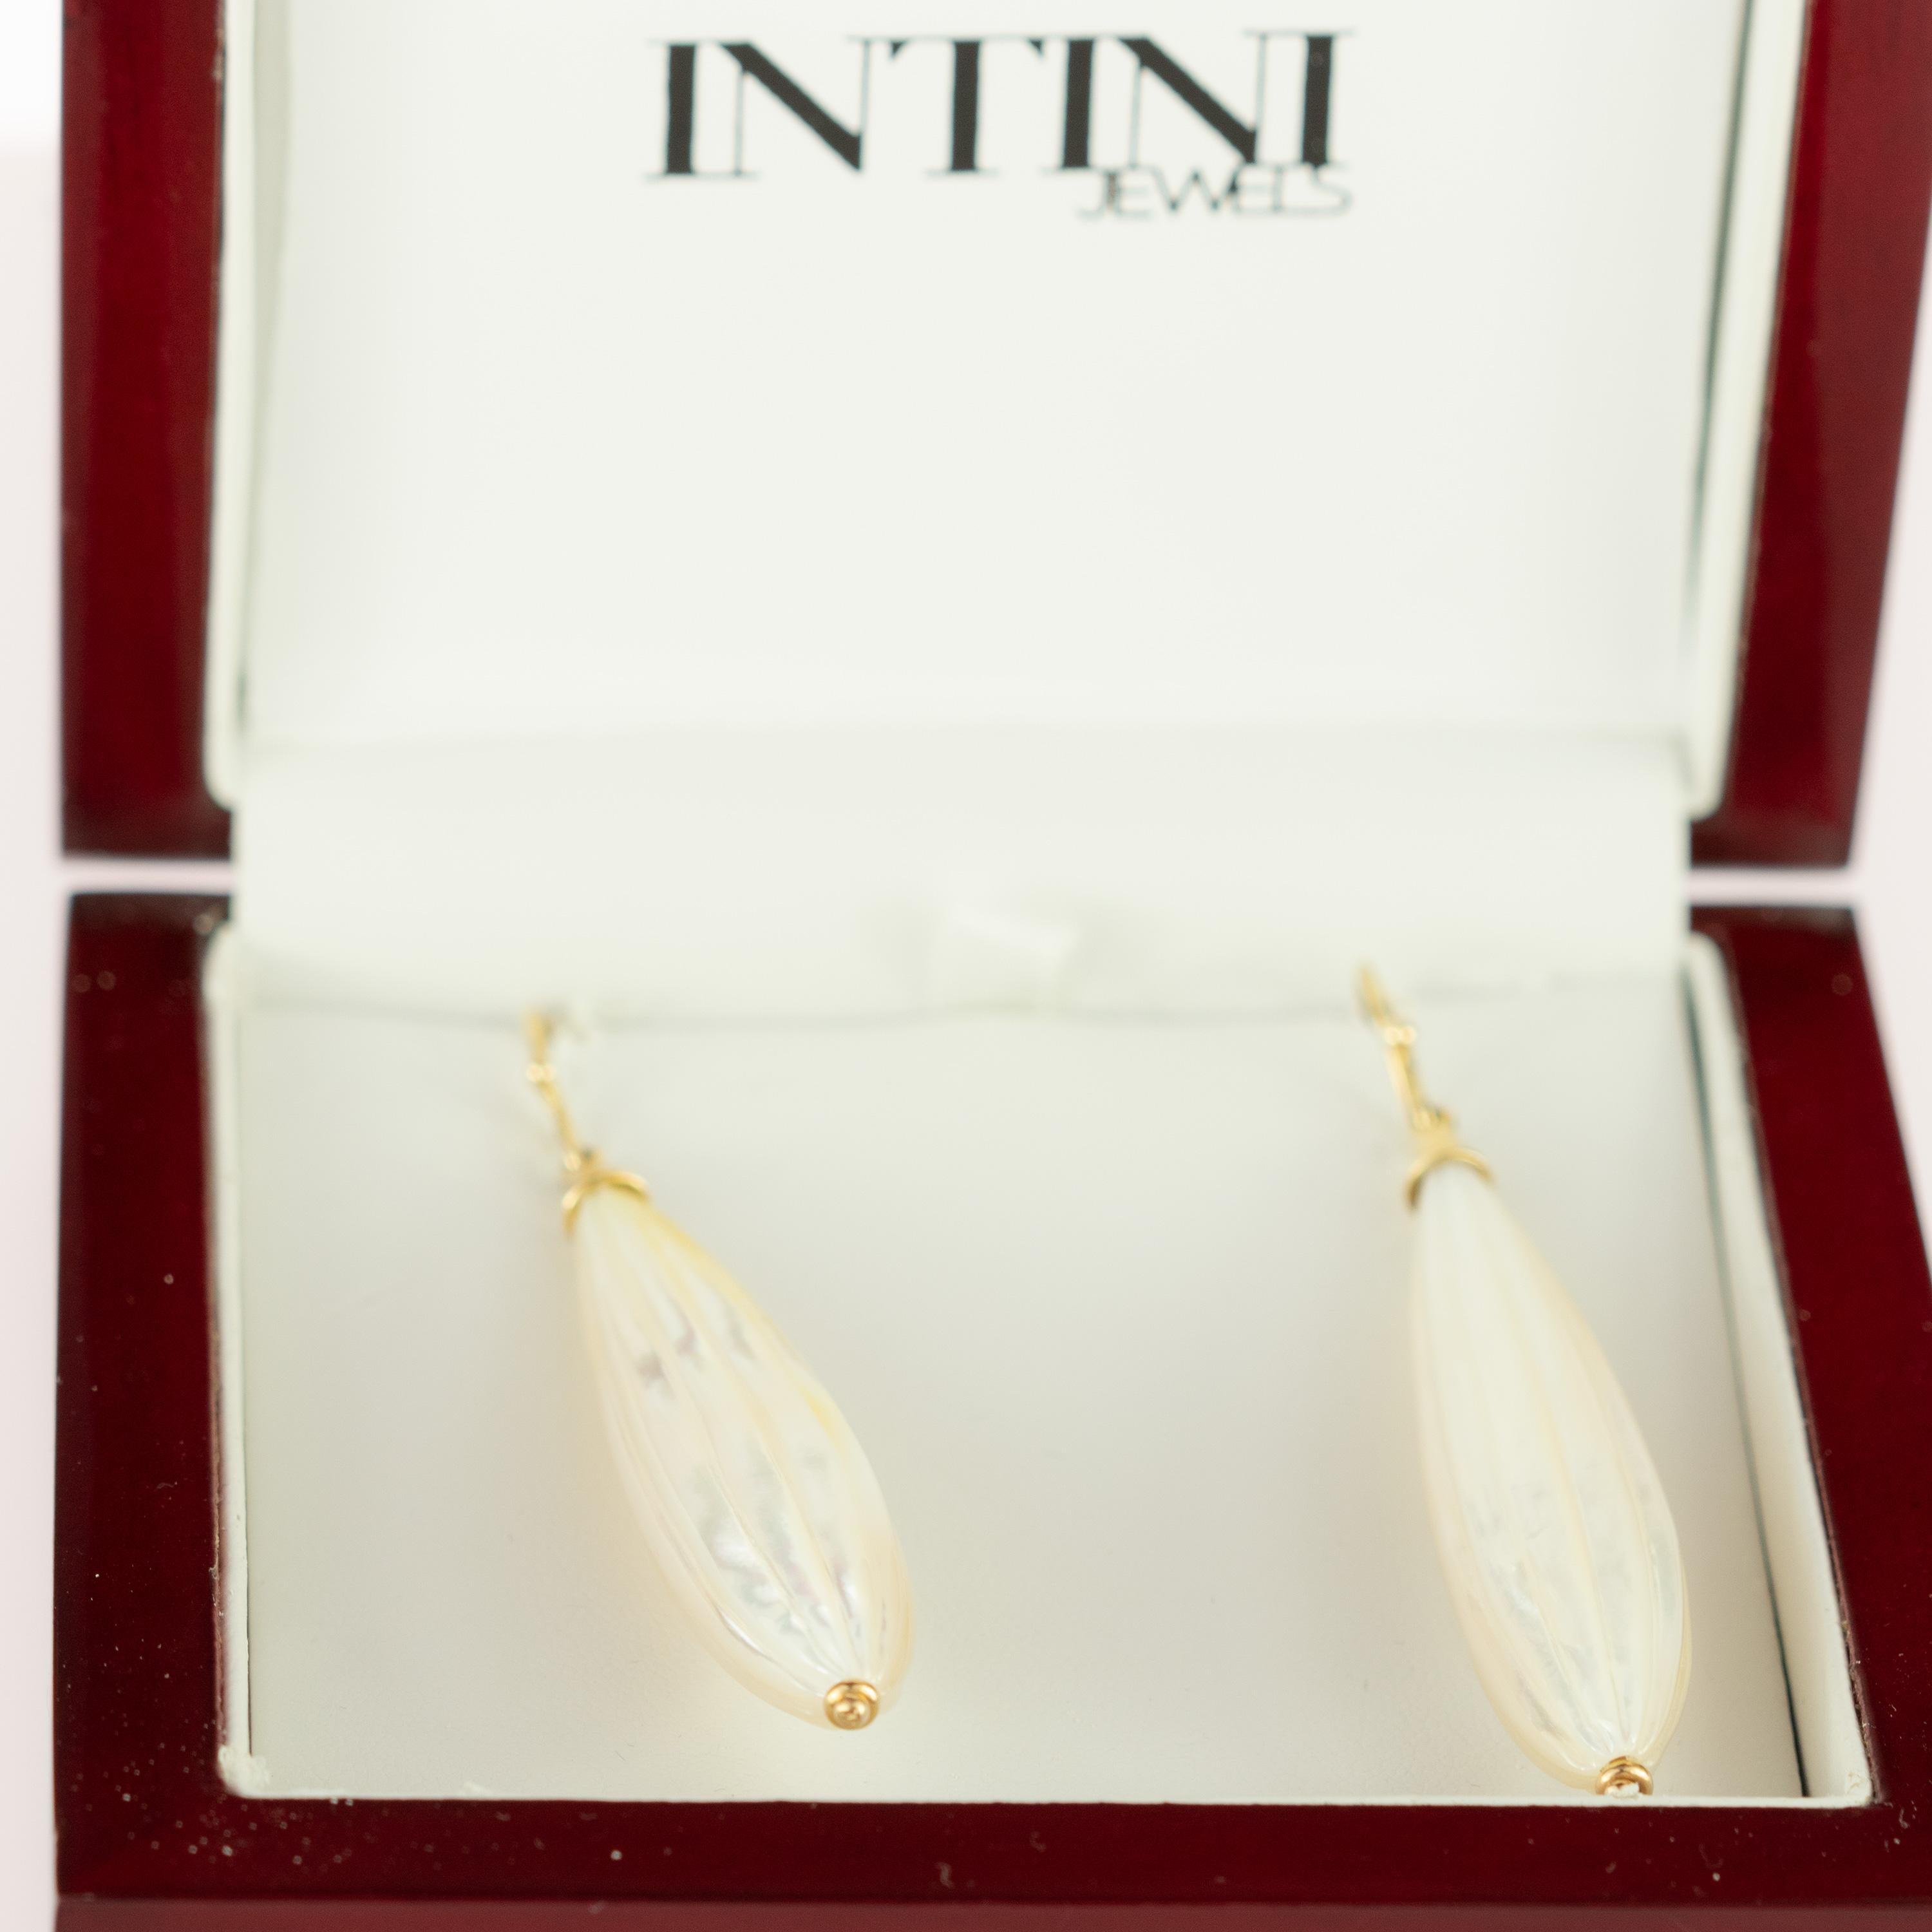 Empire Intini Jewels Gold Carved Mother Pearl Natural Color Tear Drops Dangle Earrings For Sale